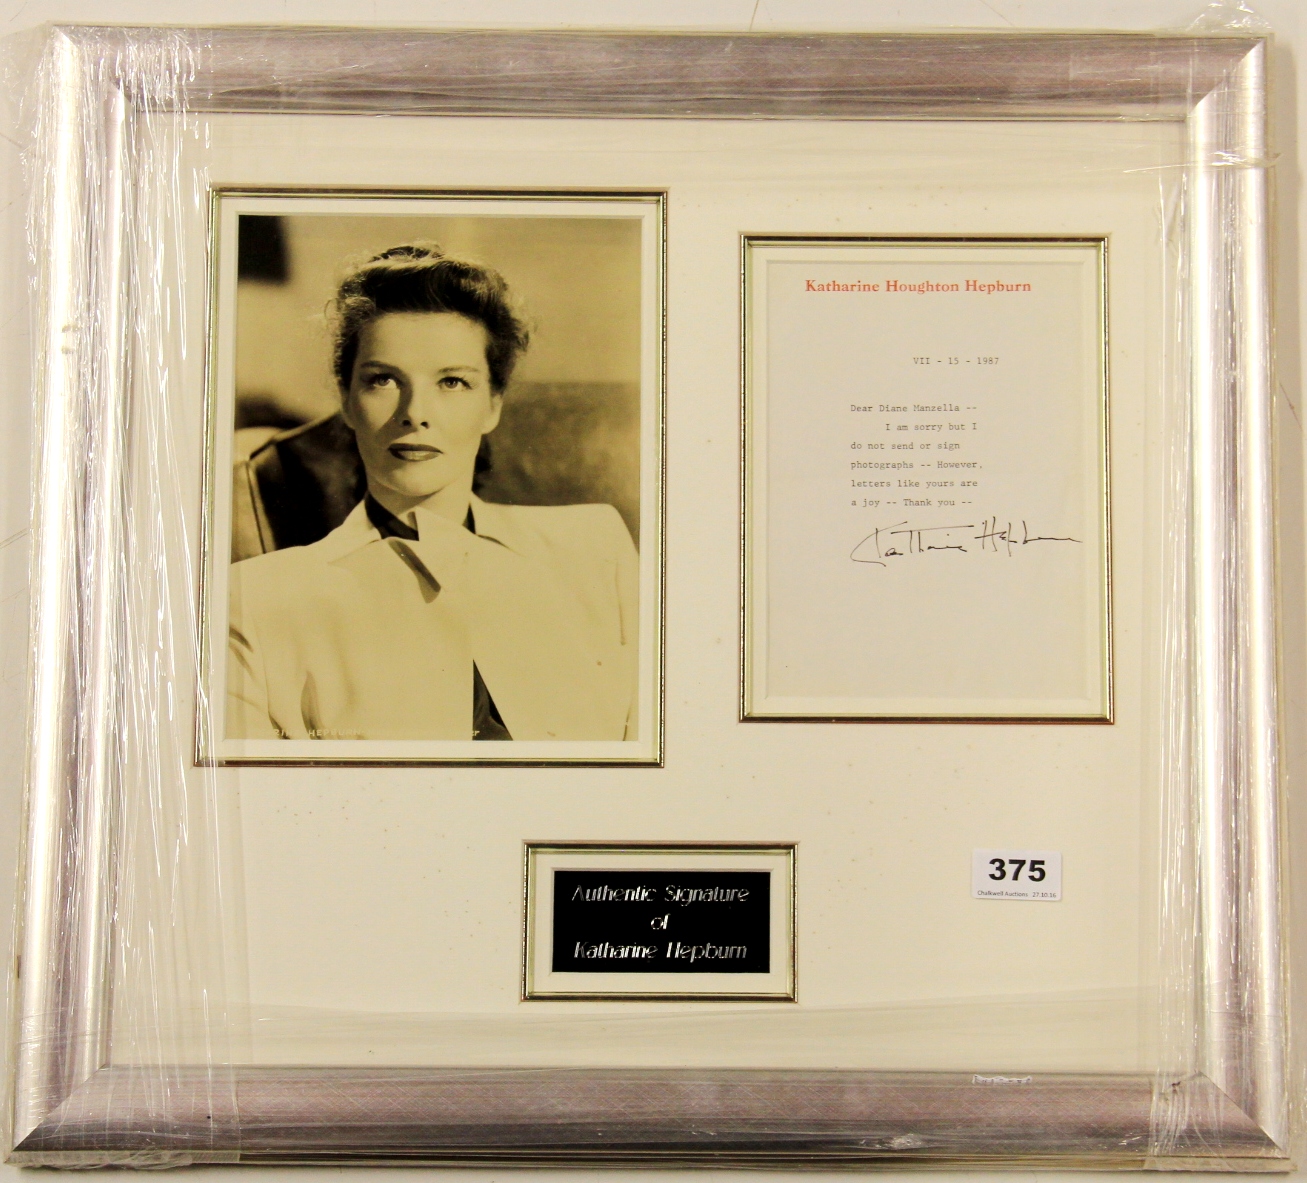 A framed autographed signed letter by Katharine Hepburn with vintage photograph, 55 x 50cm.